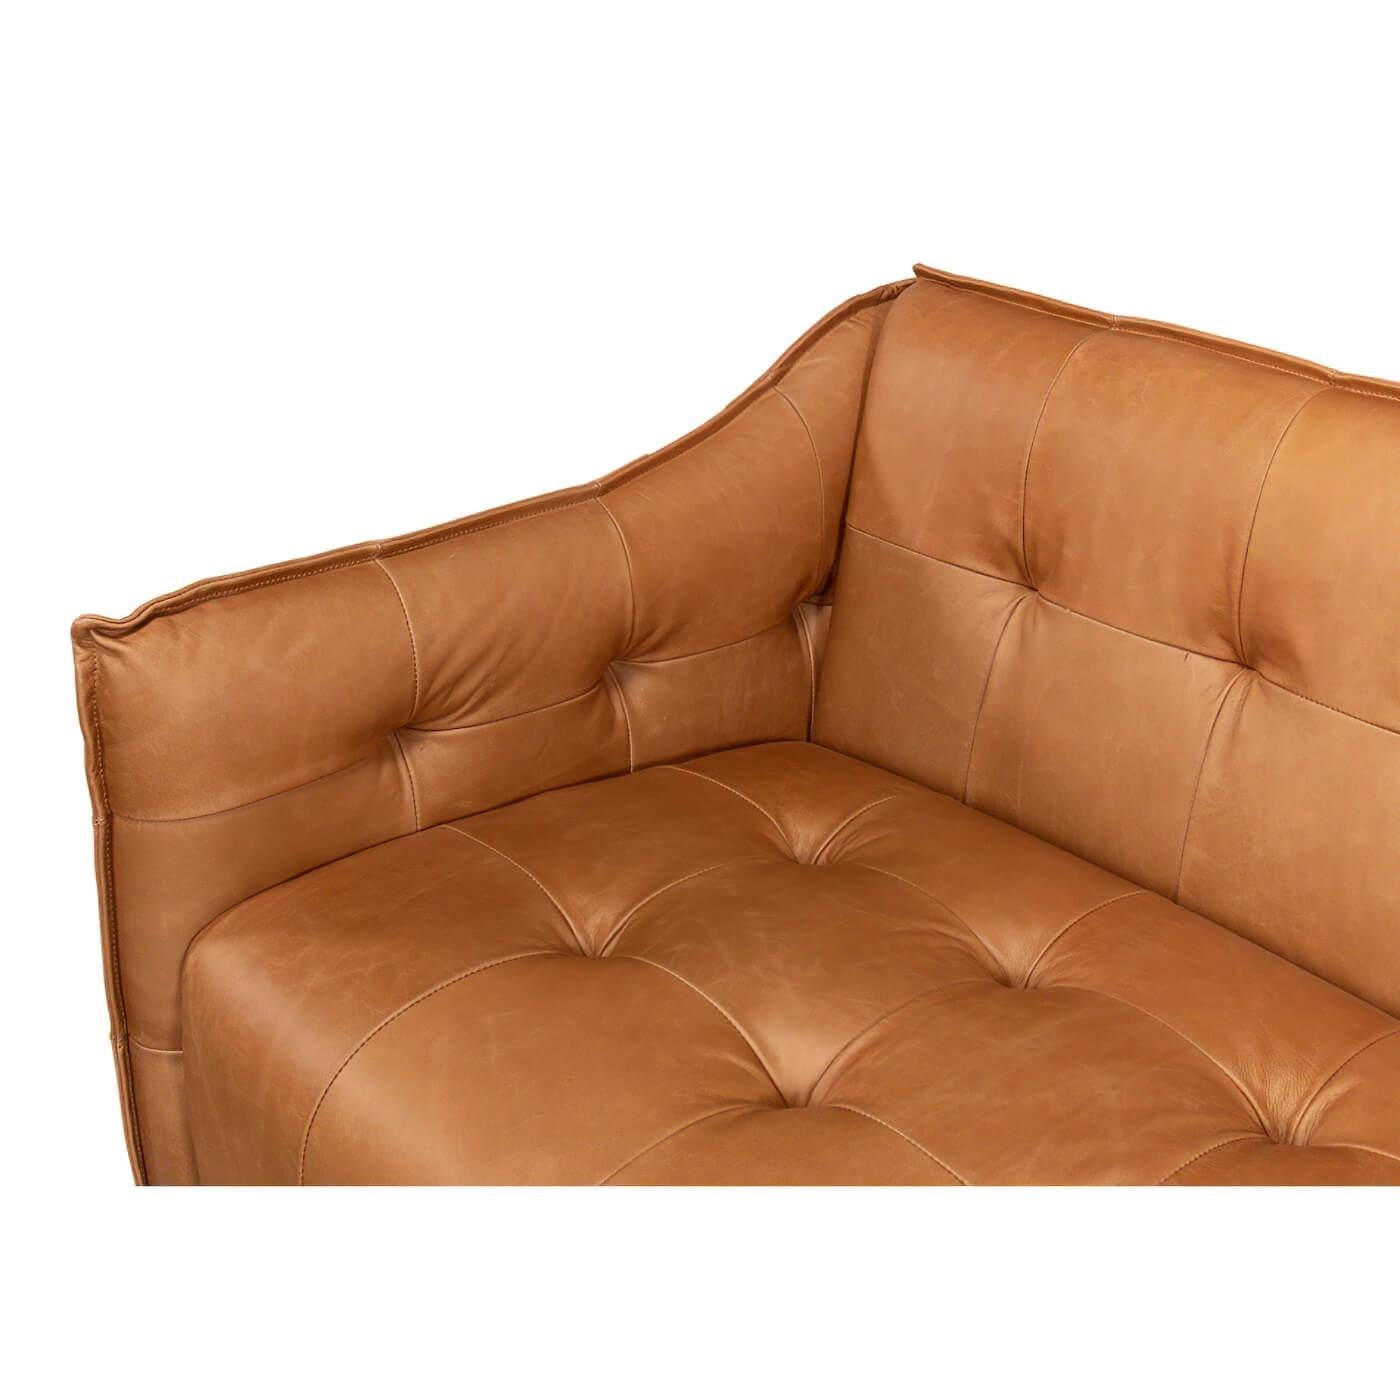 Asian Mid-Century Style Leather Sofa For Sale